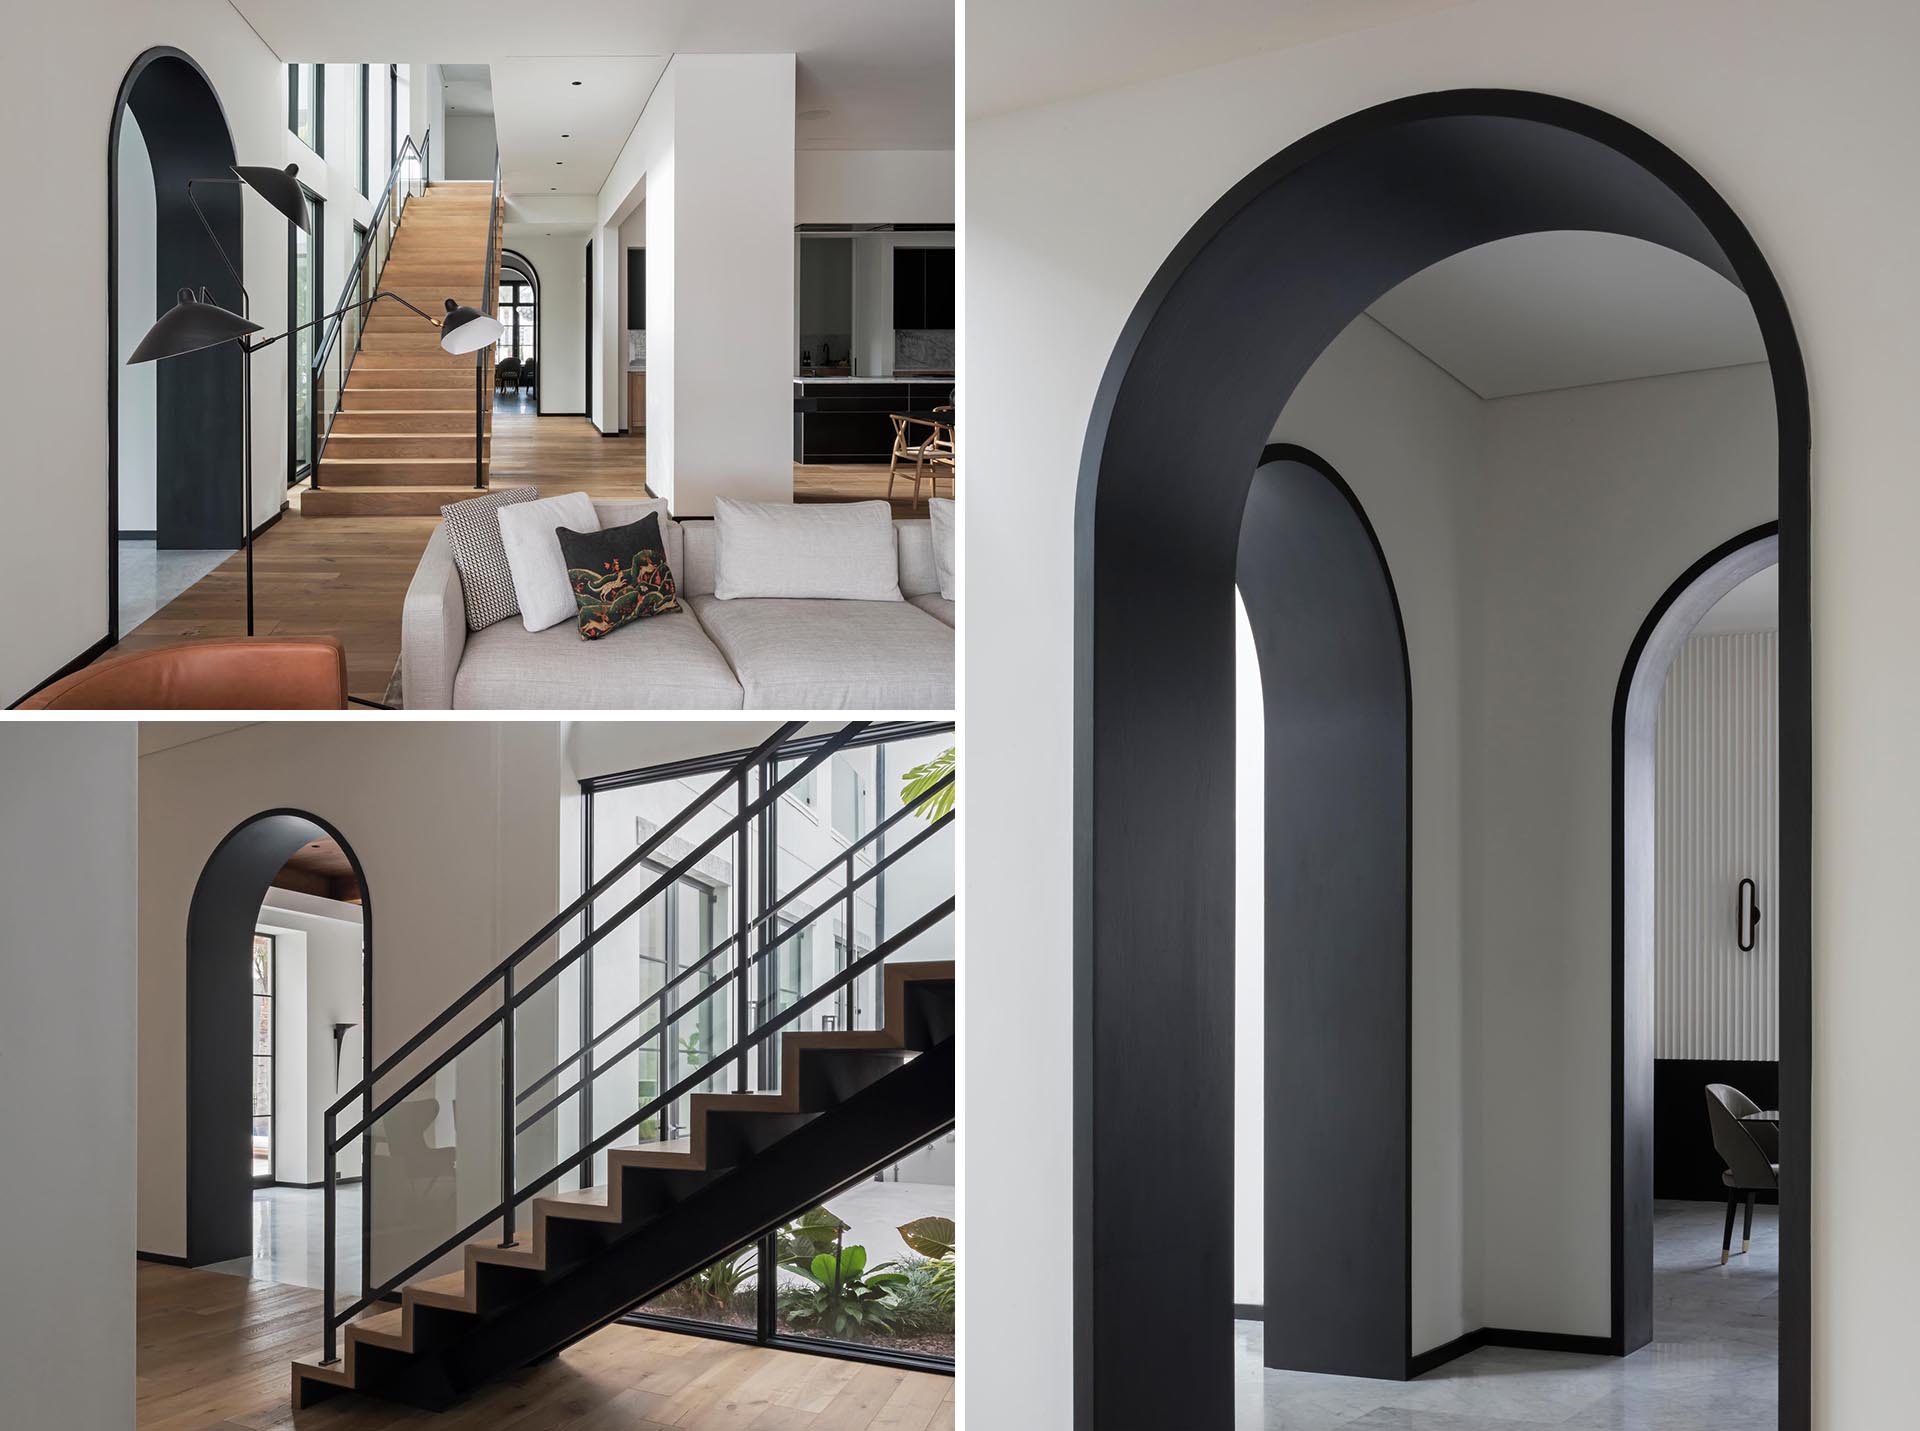 Matte Black Lined Archways Complement Other Black Accents Throughout This  Interior